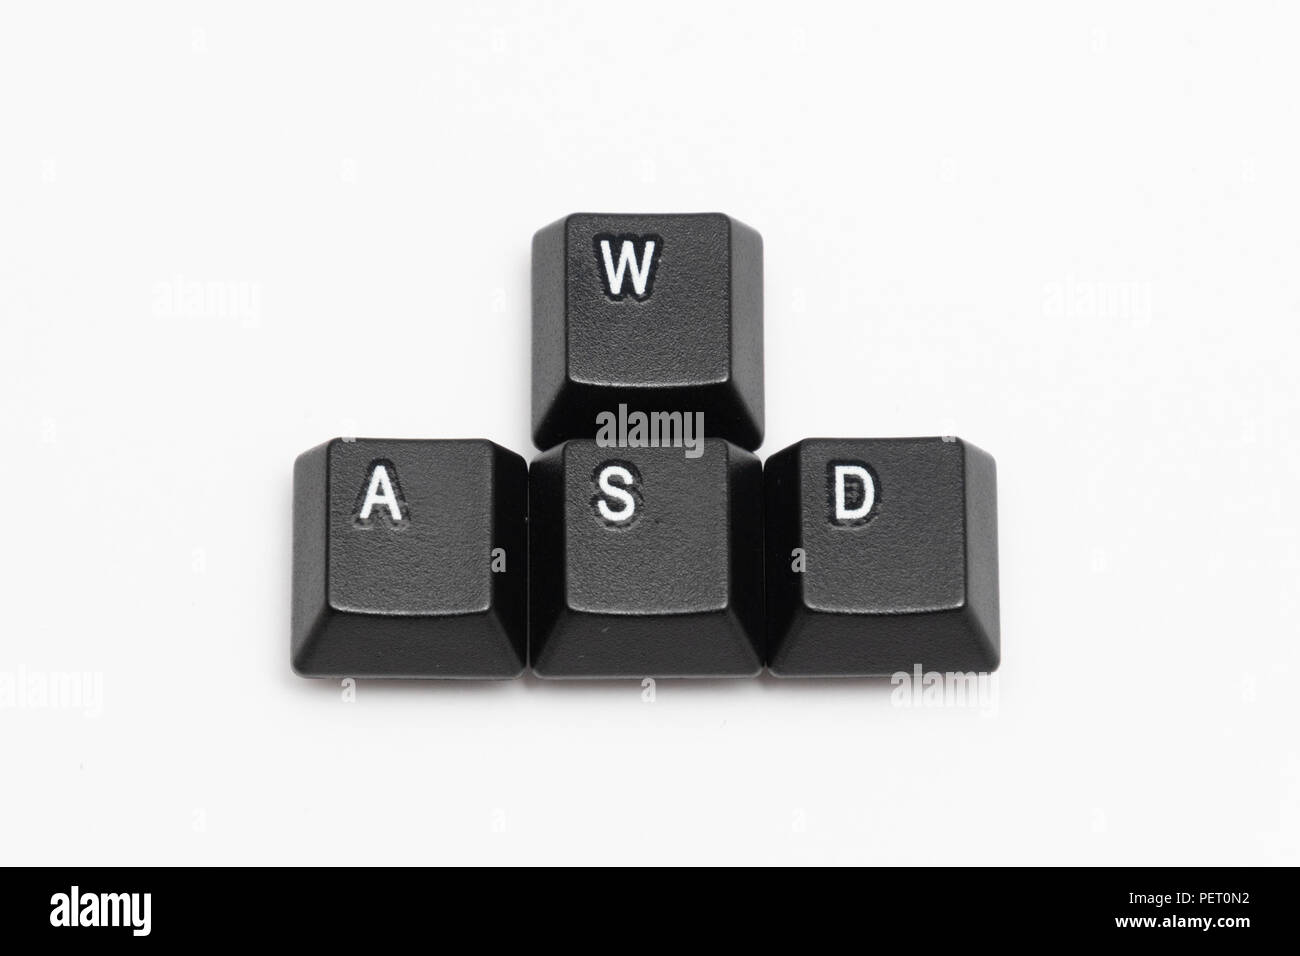 Single black keys of keyboard with different letters Stock Photo